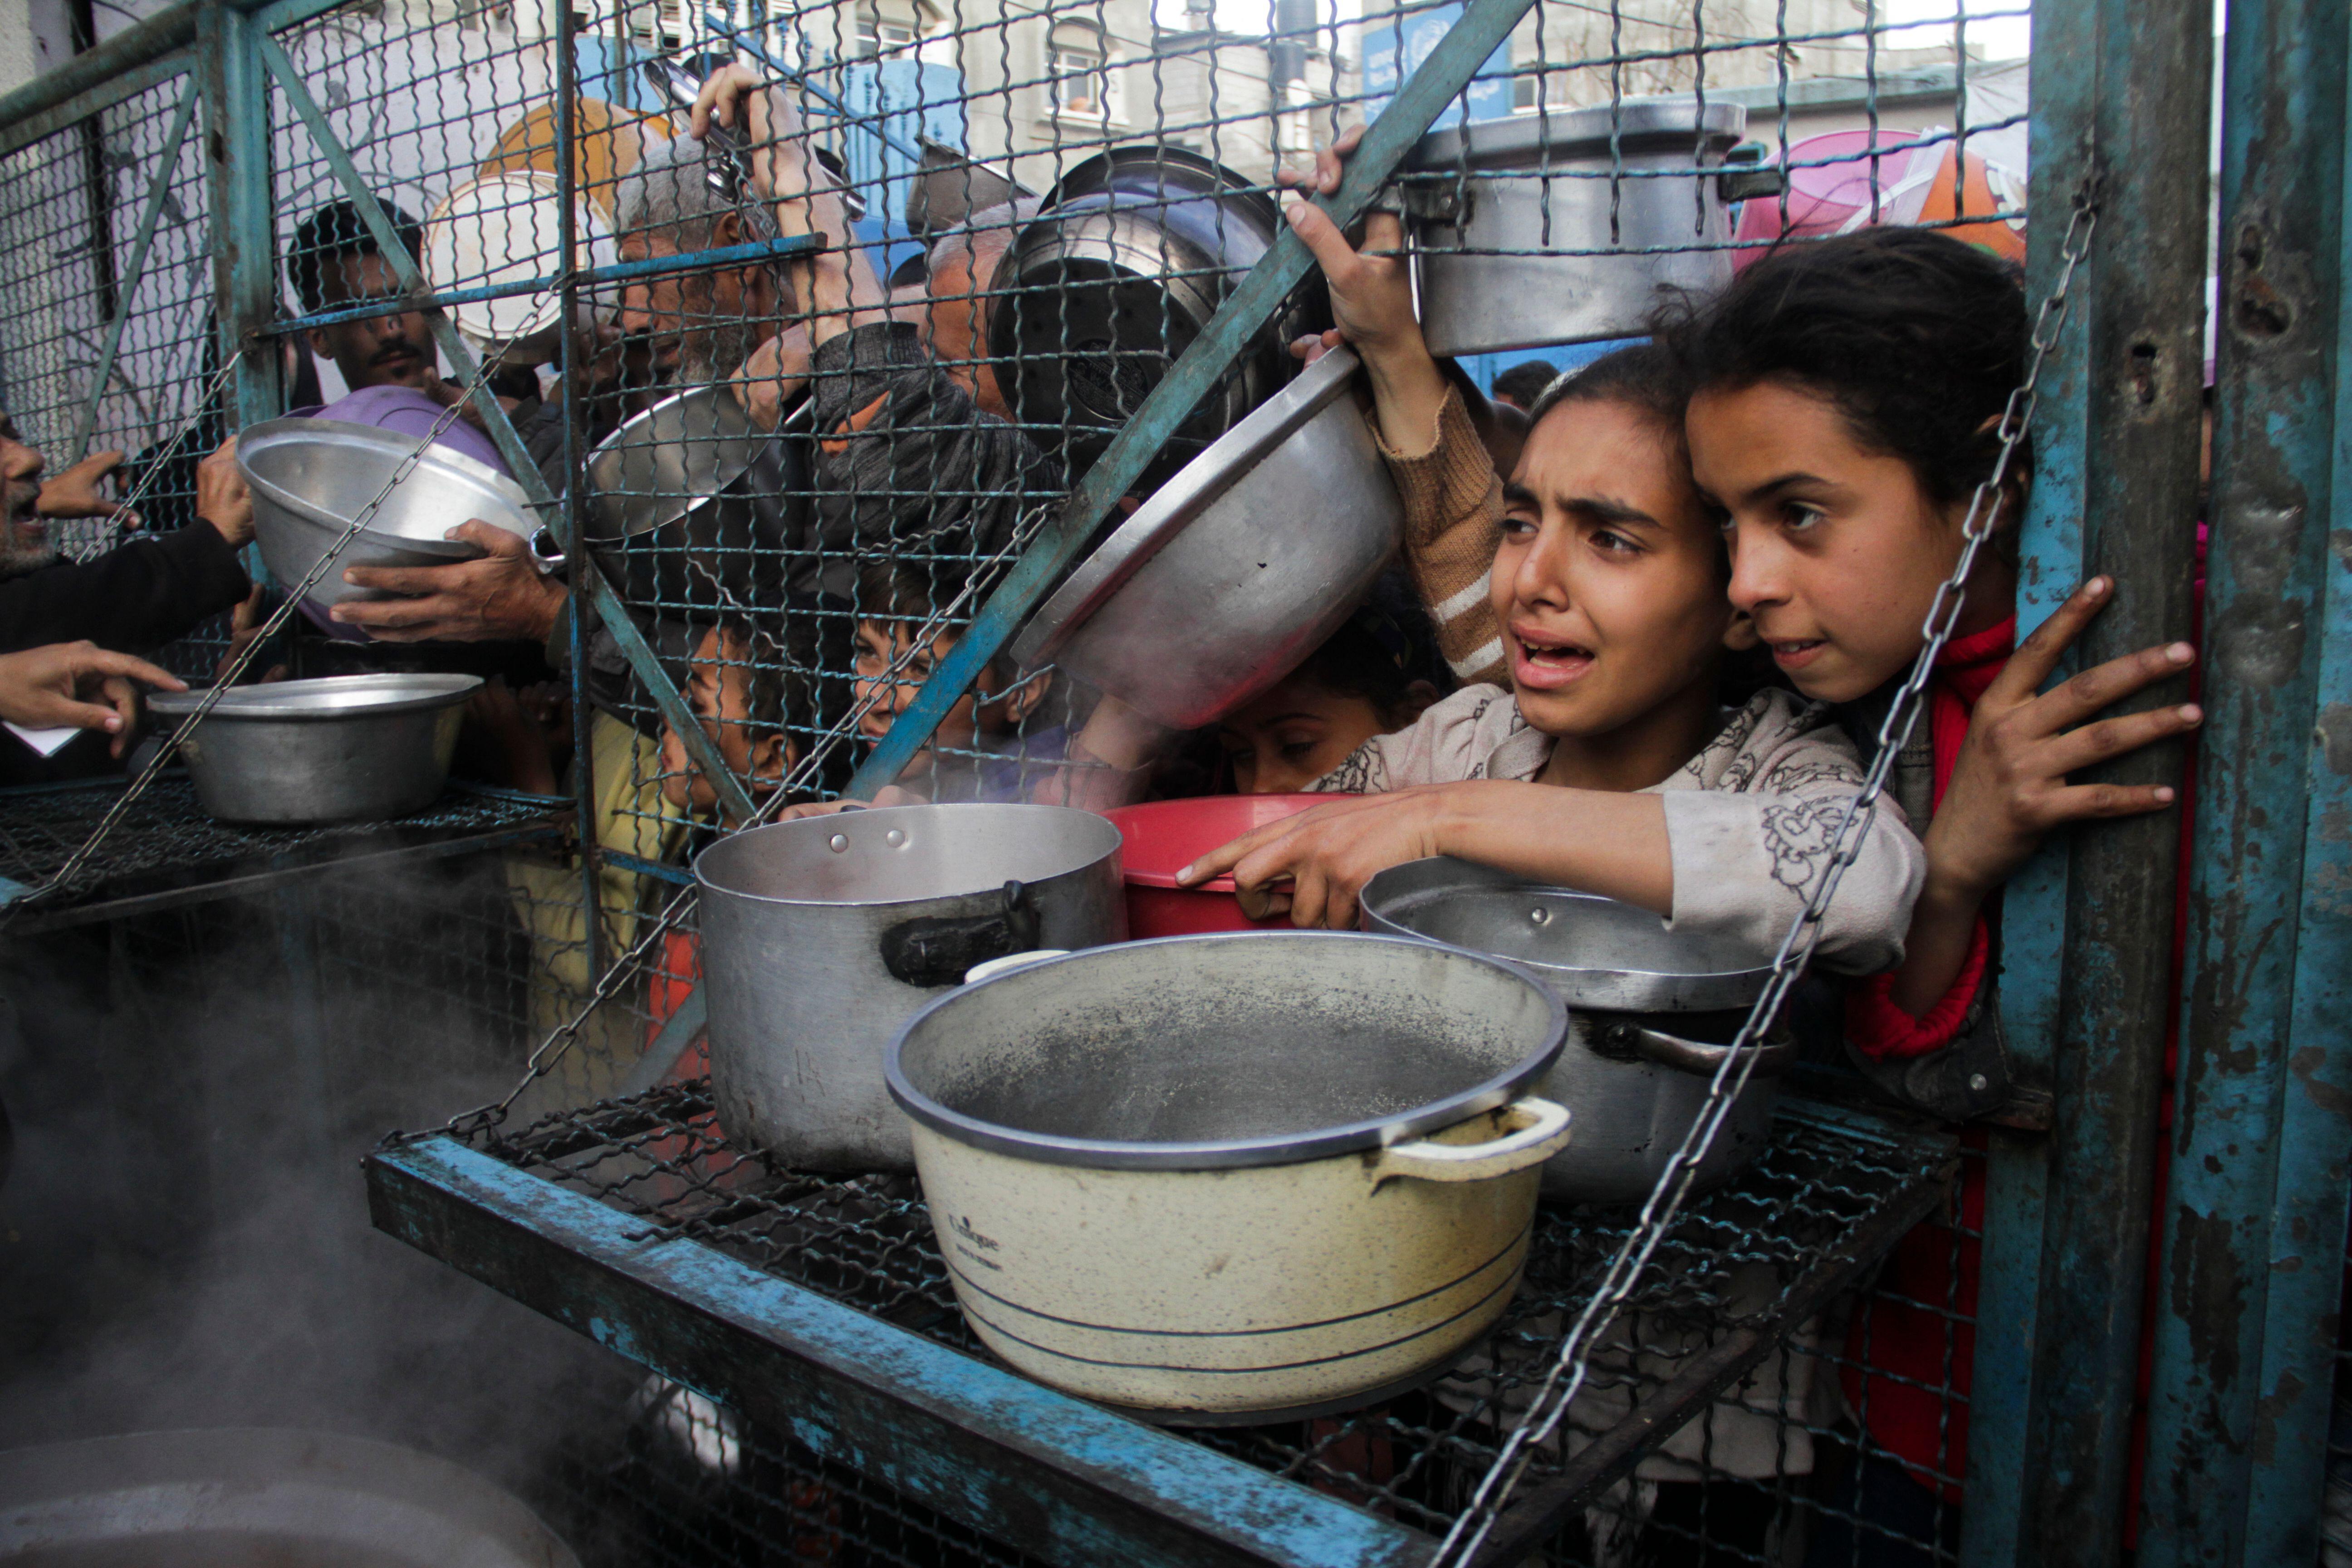 Gaza faces famine amid pleas for peace with justice